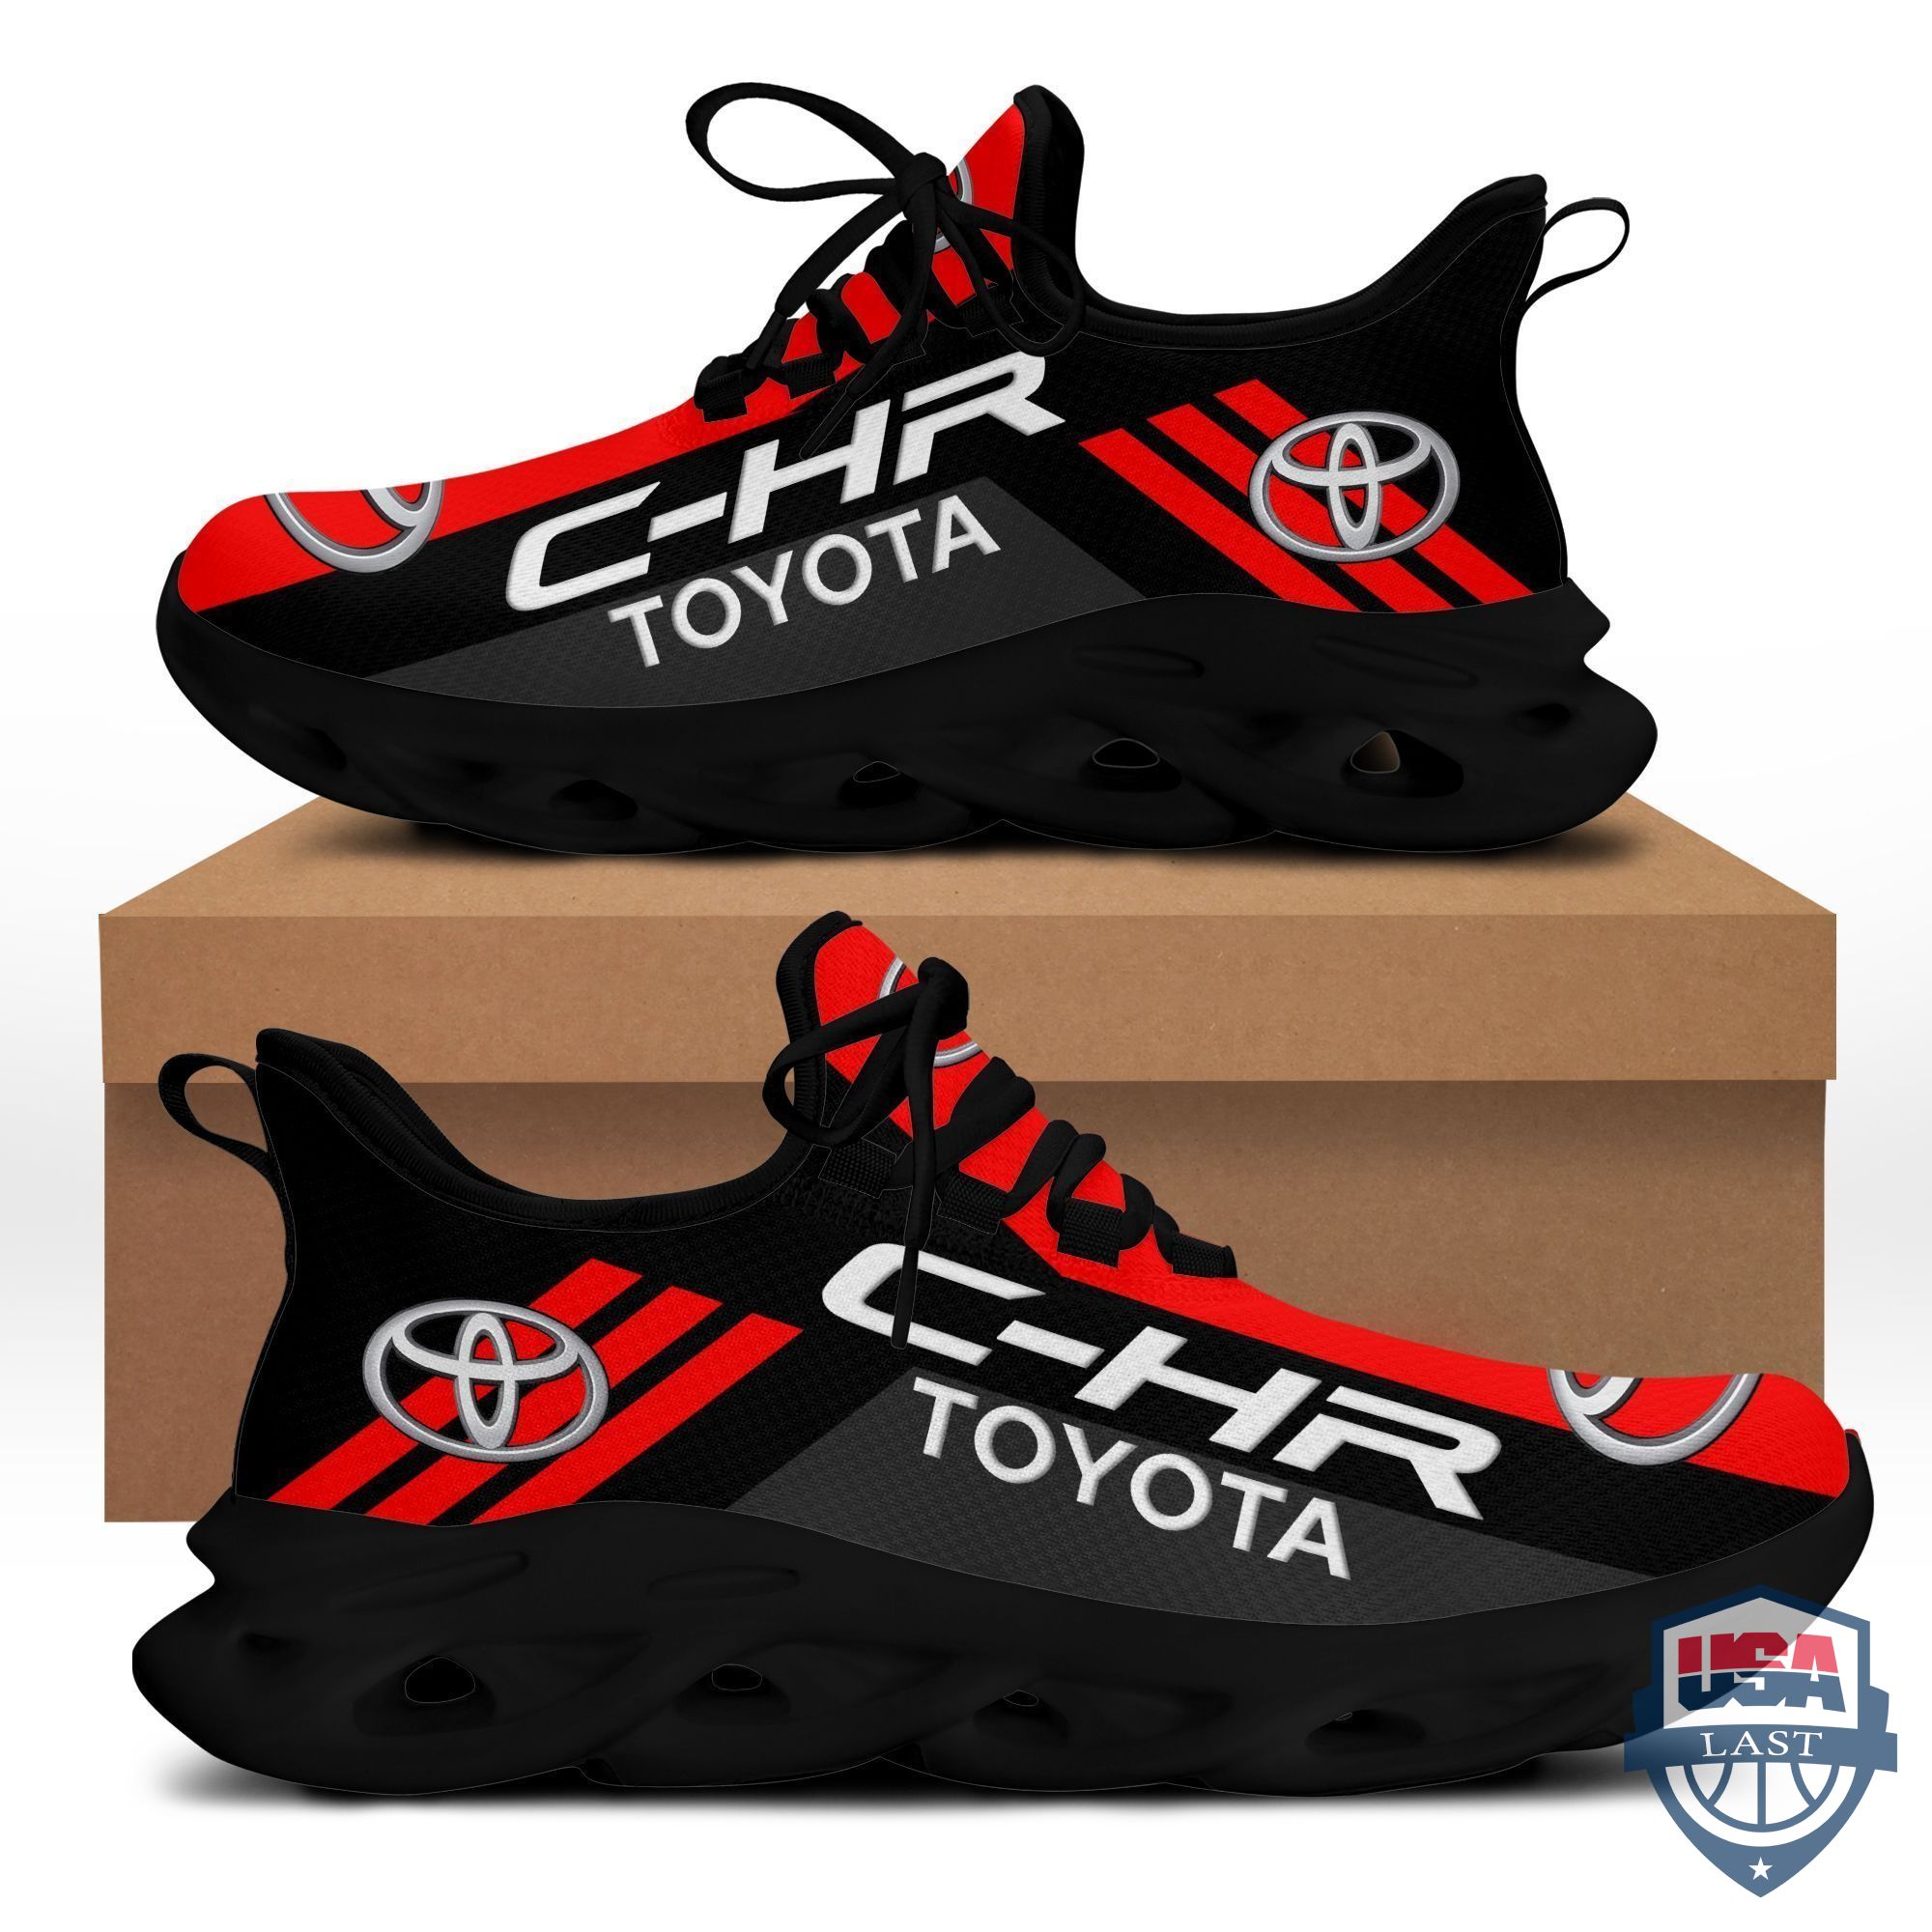 Toyota C-HR Max Shoes Shoes Red Version